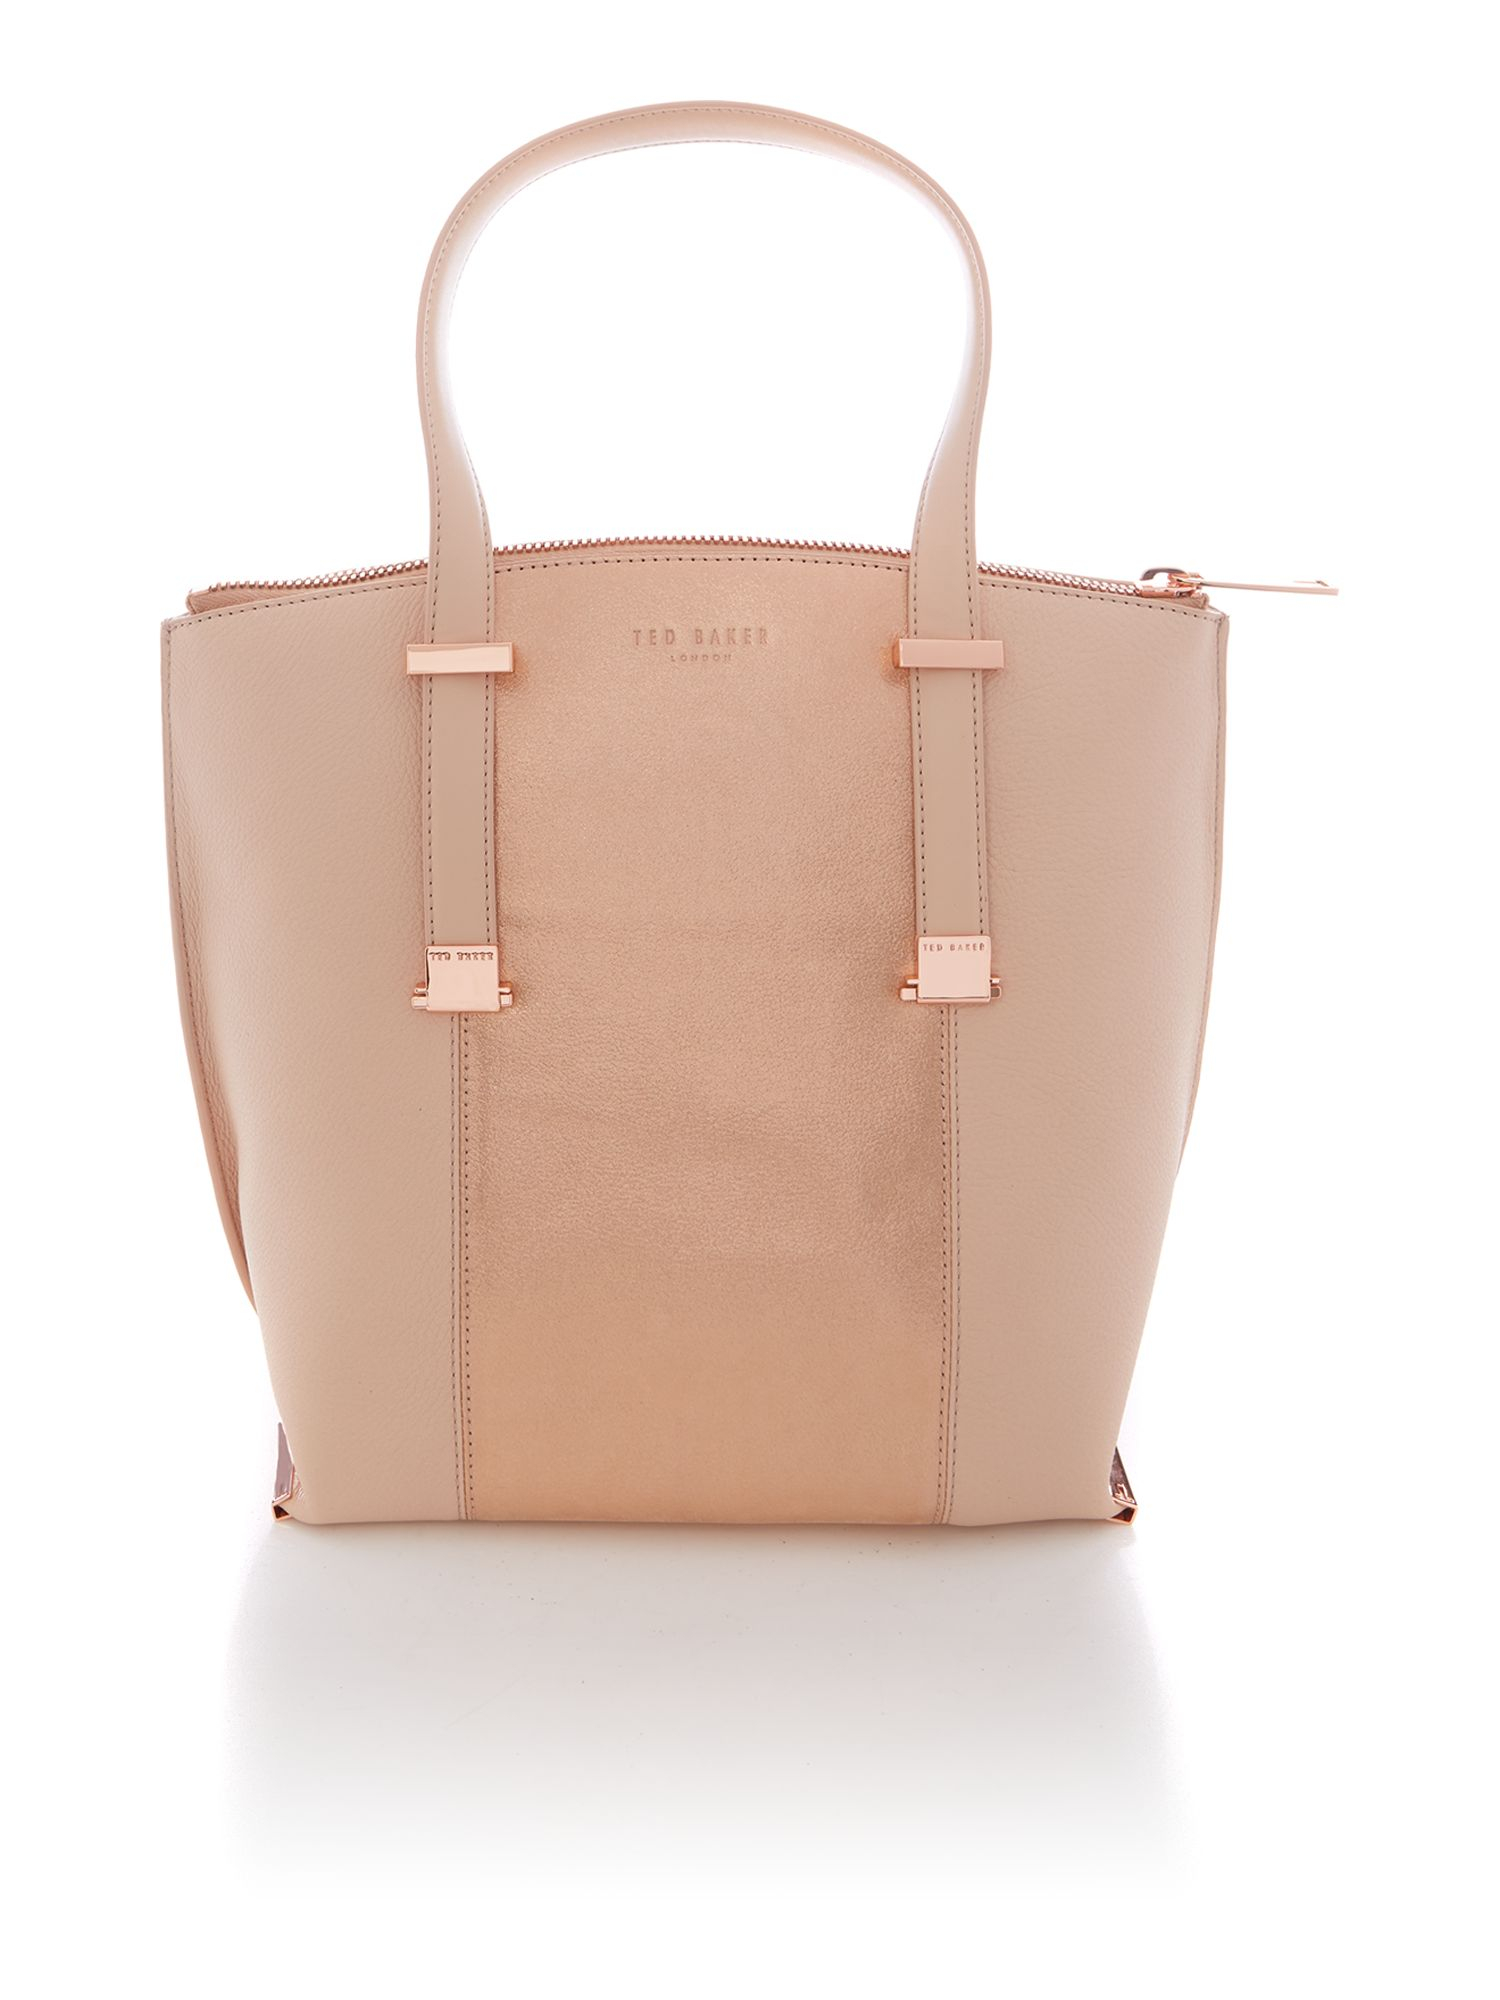 Ted baker Rose Gold Large Leather Tote Bag in Pink (Rose%20Gold) | Lyst